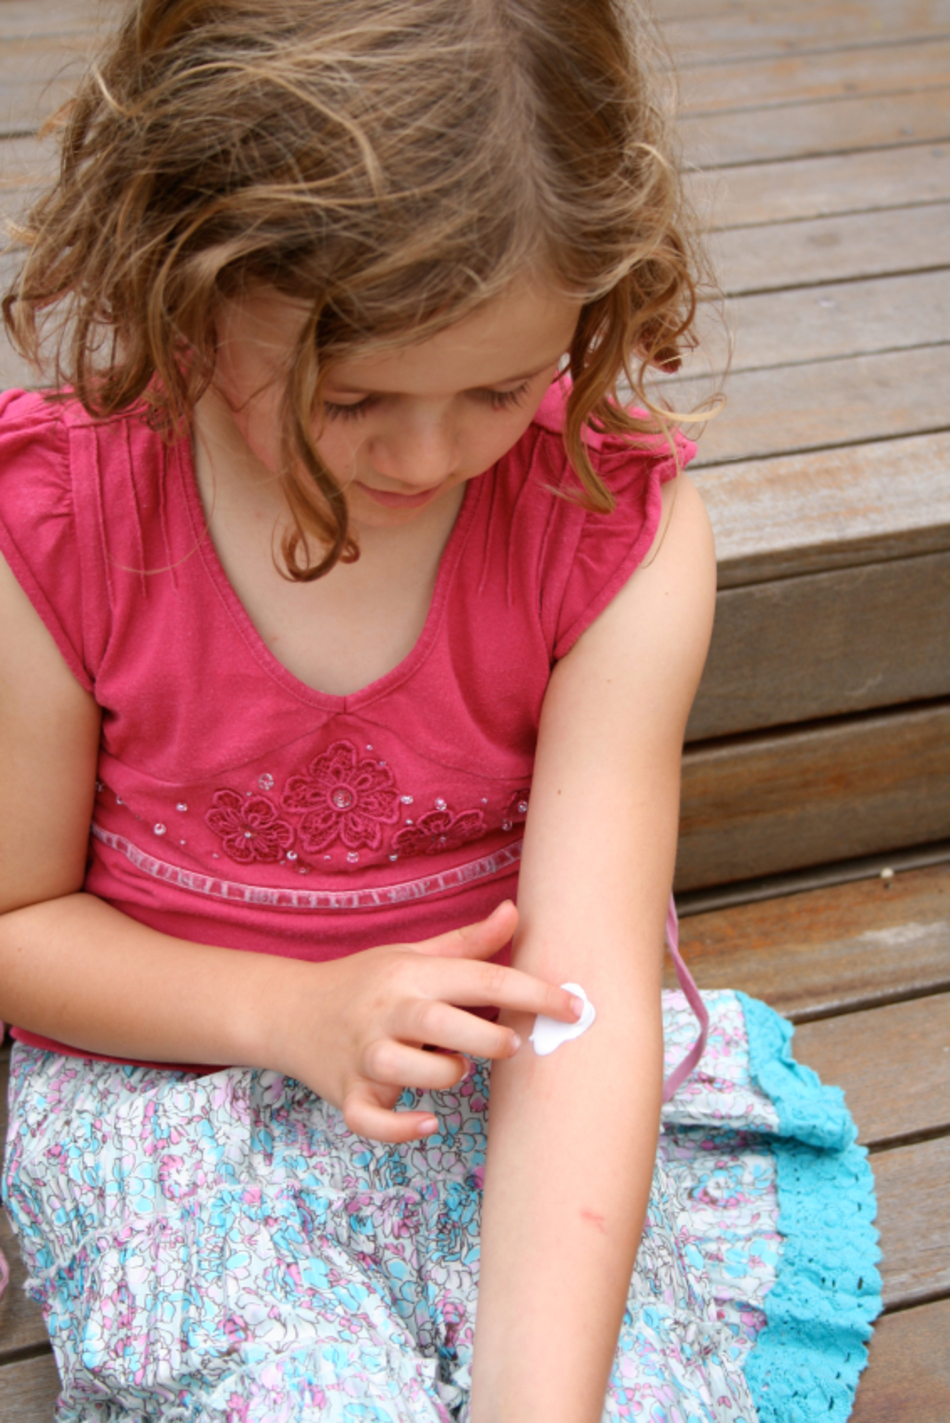 Tips for Relieving your Child’s Eczema so They Stop Scratching